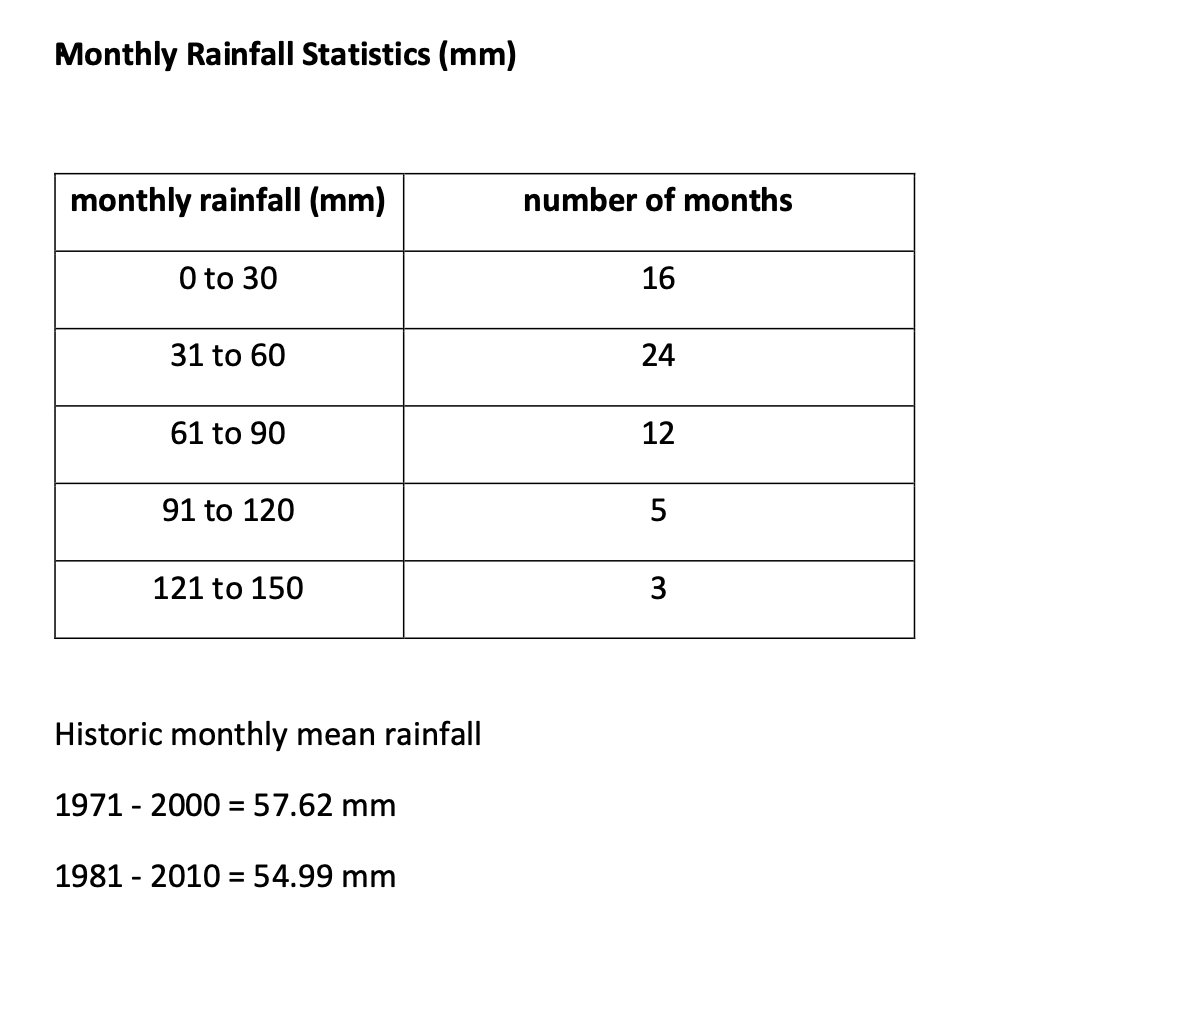 Monthly Rainfall Statistics (mm)
monthly rainfall (mm)
0 to 30
31 to 60
61 to 90
91 to 120
121 to 150
Historic monthly mean rainfall
1971 - 2000 = 57.62 mm
1981-2010 = 54.99 mm
number of months
16
24
12
5
3